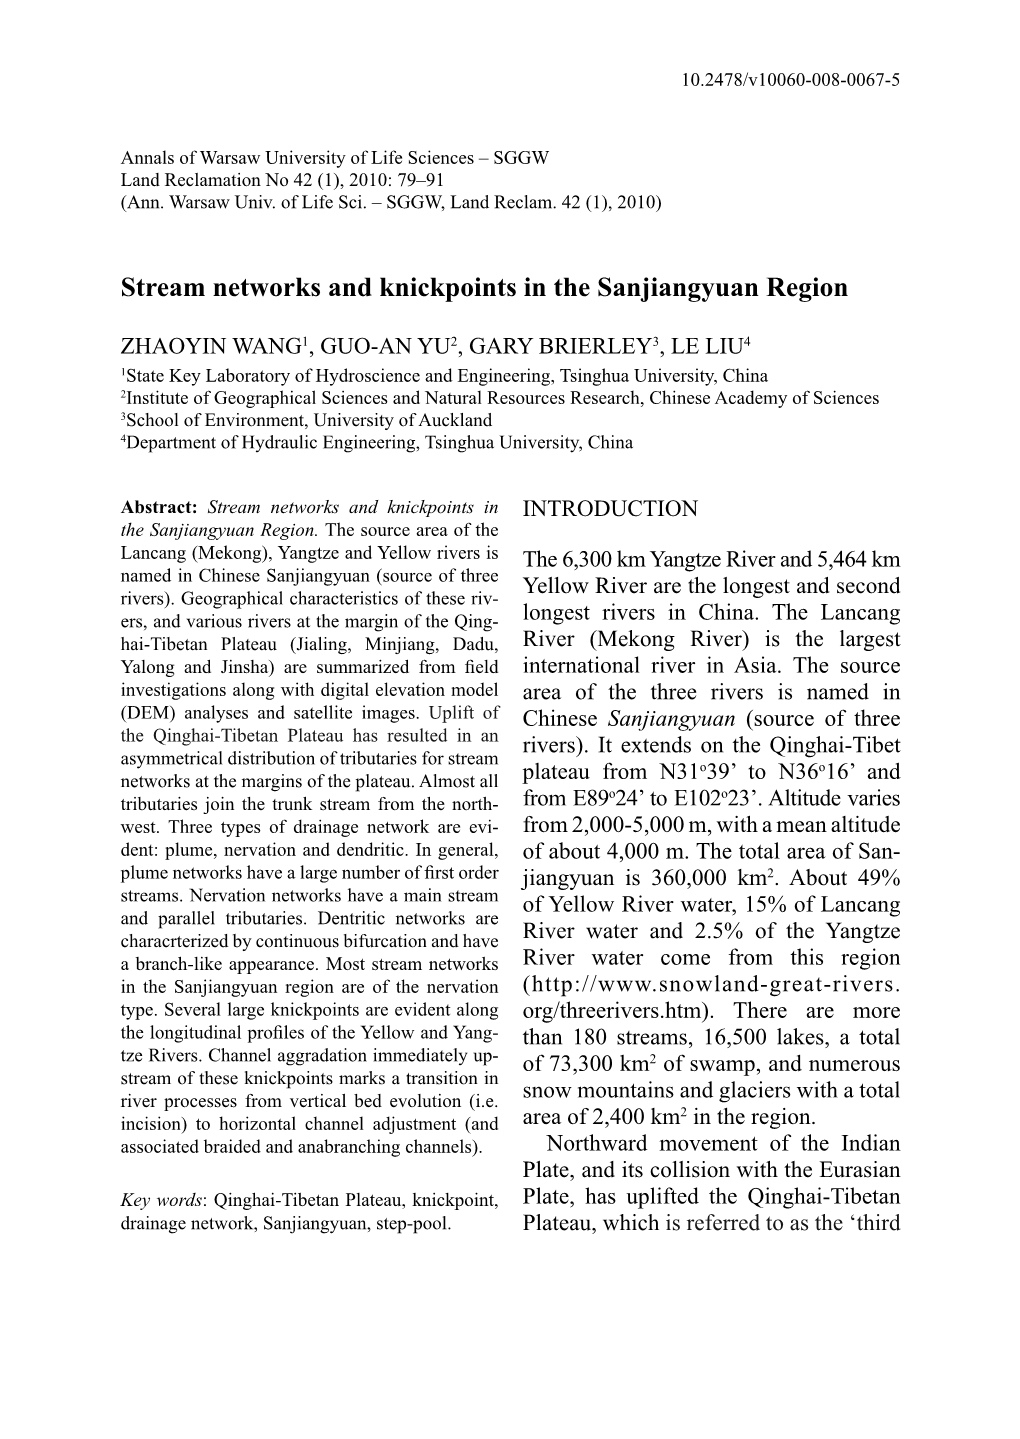 Stream Networks and Knickpoints in the Sanjiangyuan Region